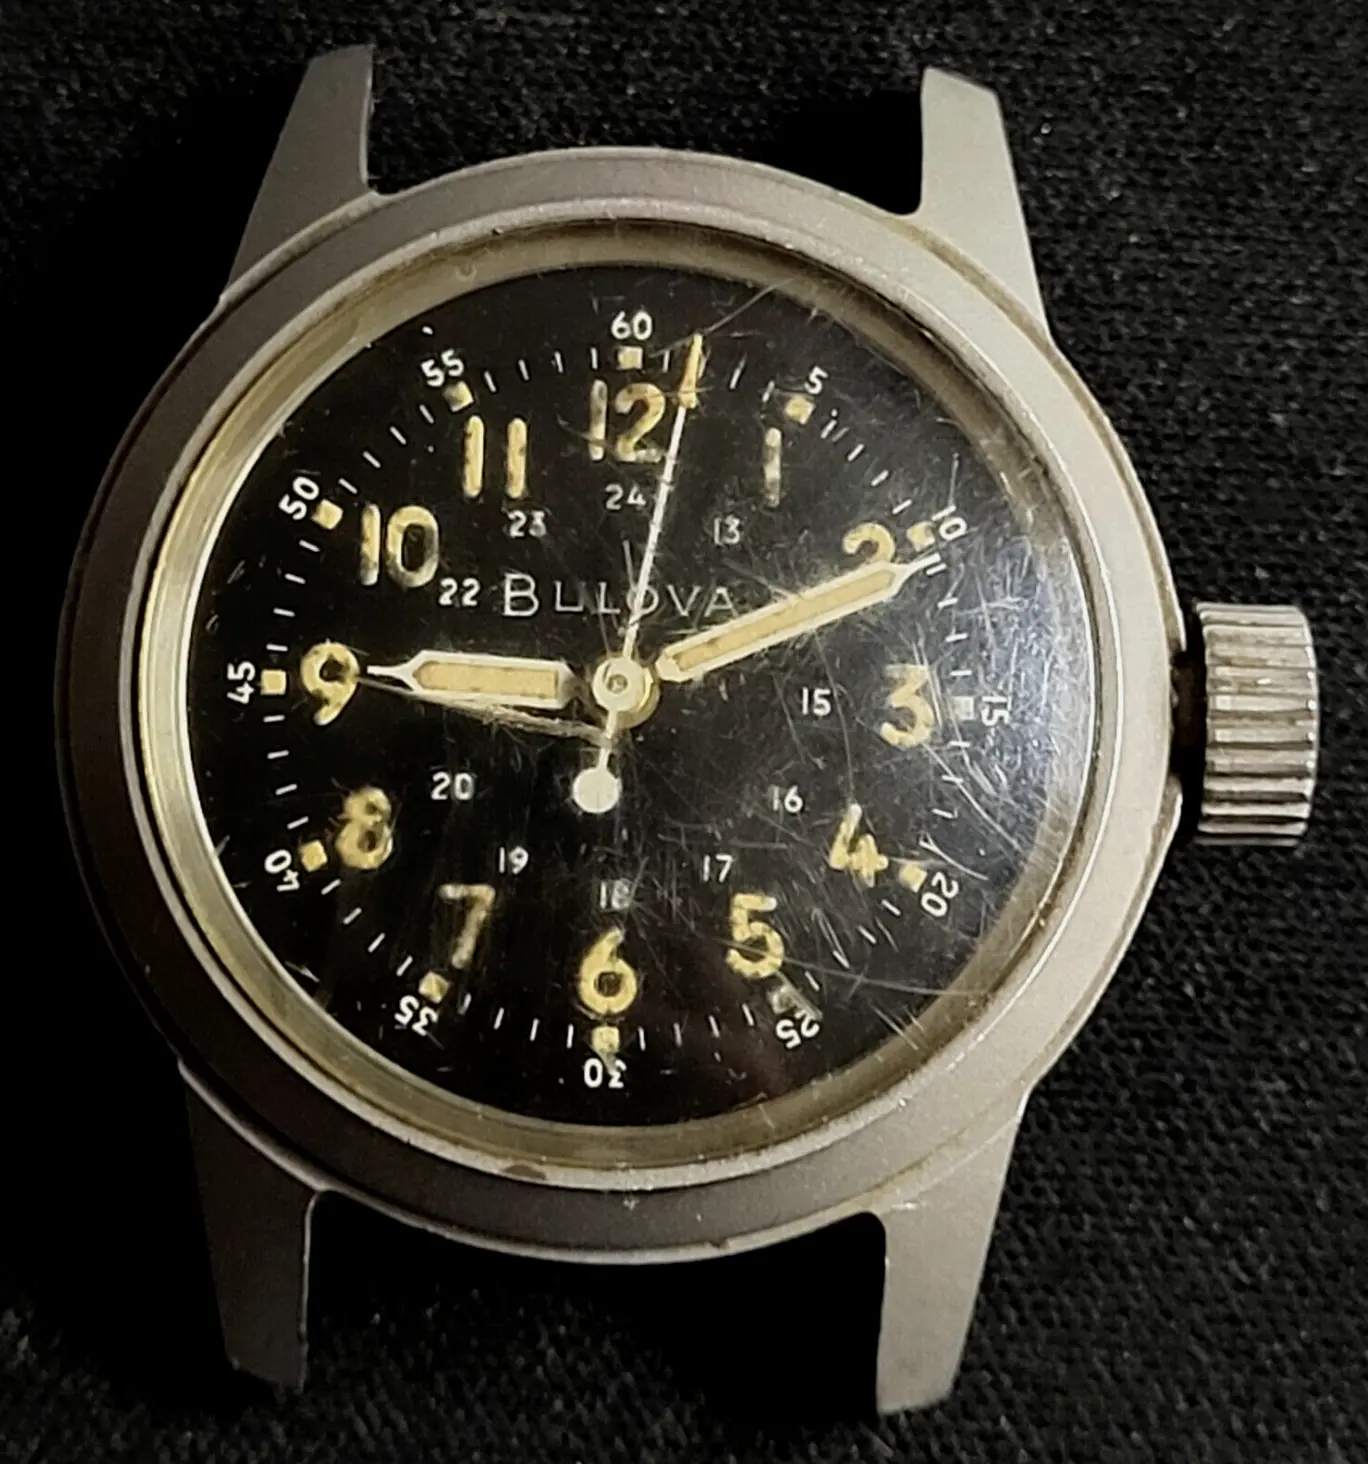 eBay Finds: Chronographs from Seiko and Heuer, Pulsar LED, & More